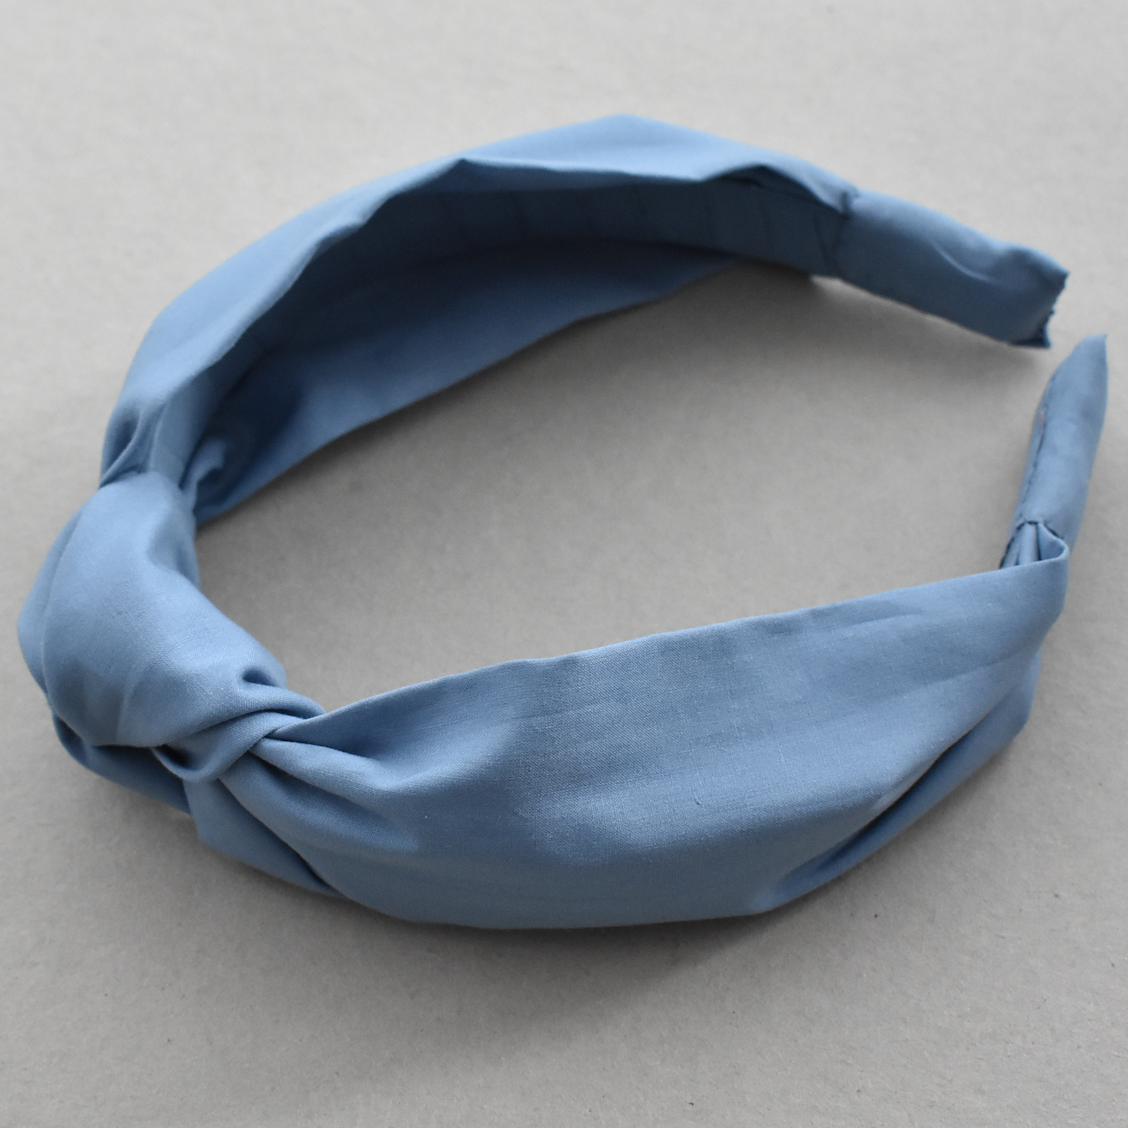 Kids Tot Knot Alice band - Liberty of London Airforce Blue